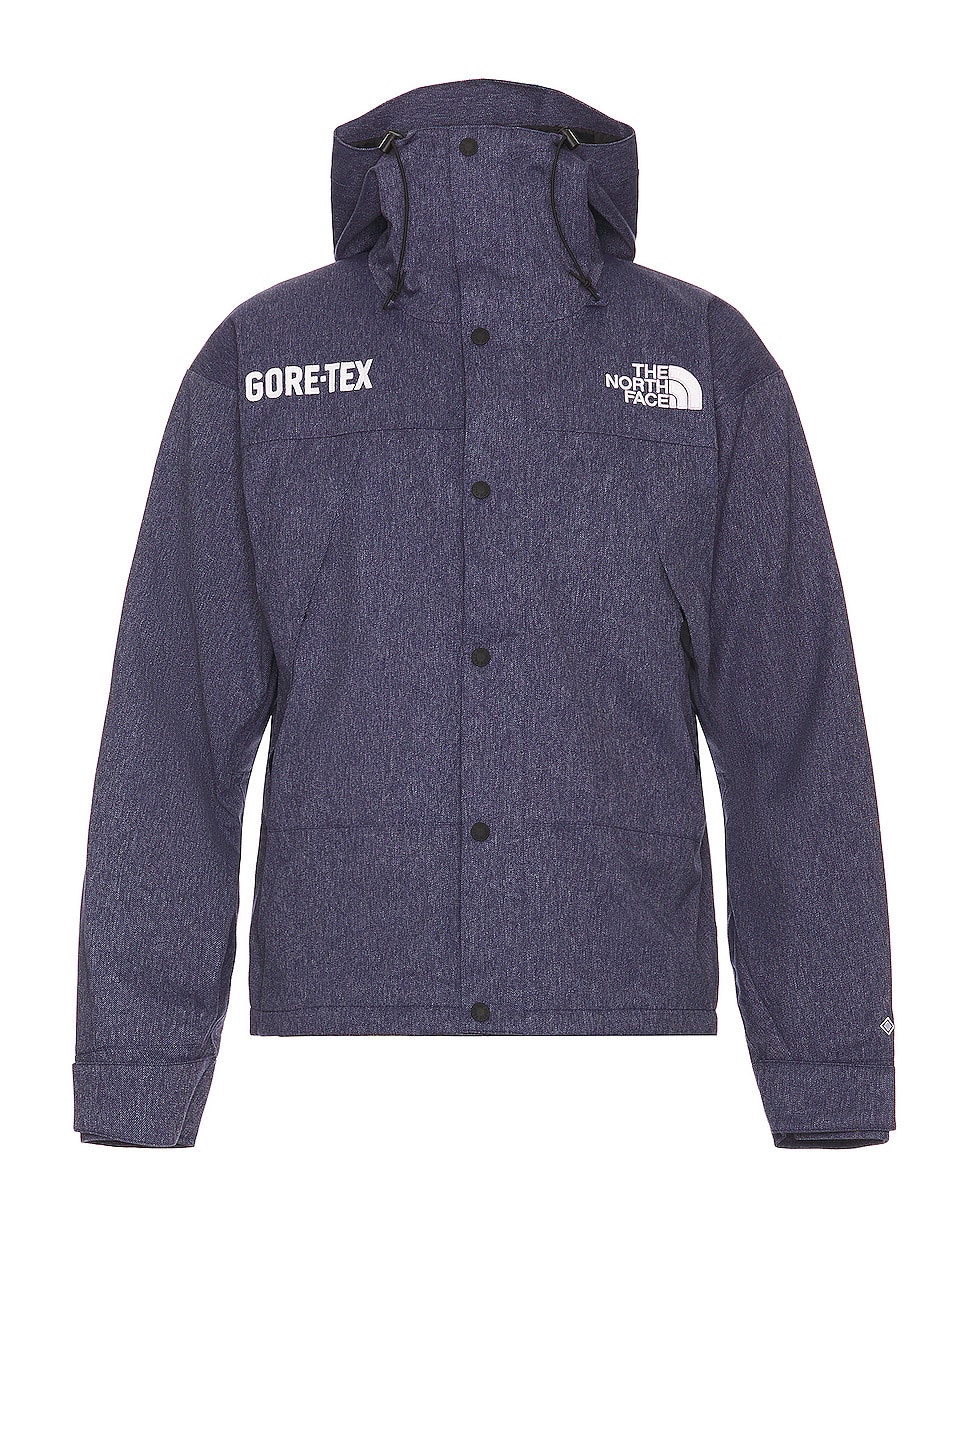 Image 1 of The North Face Gtx Mountain Jacket in Denim Blue & Tnf Black